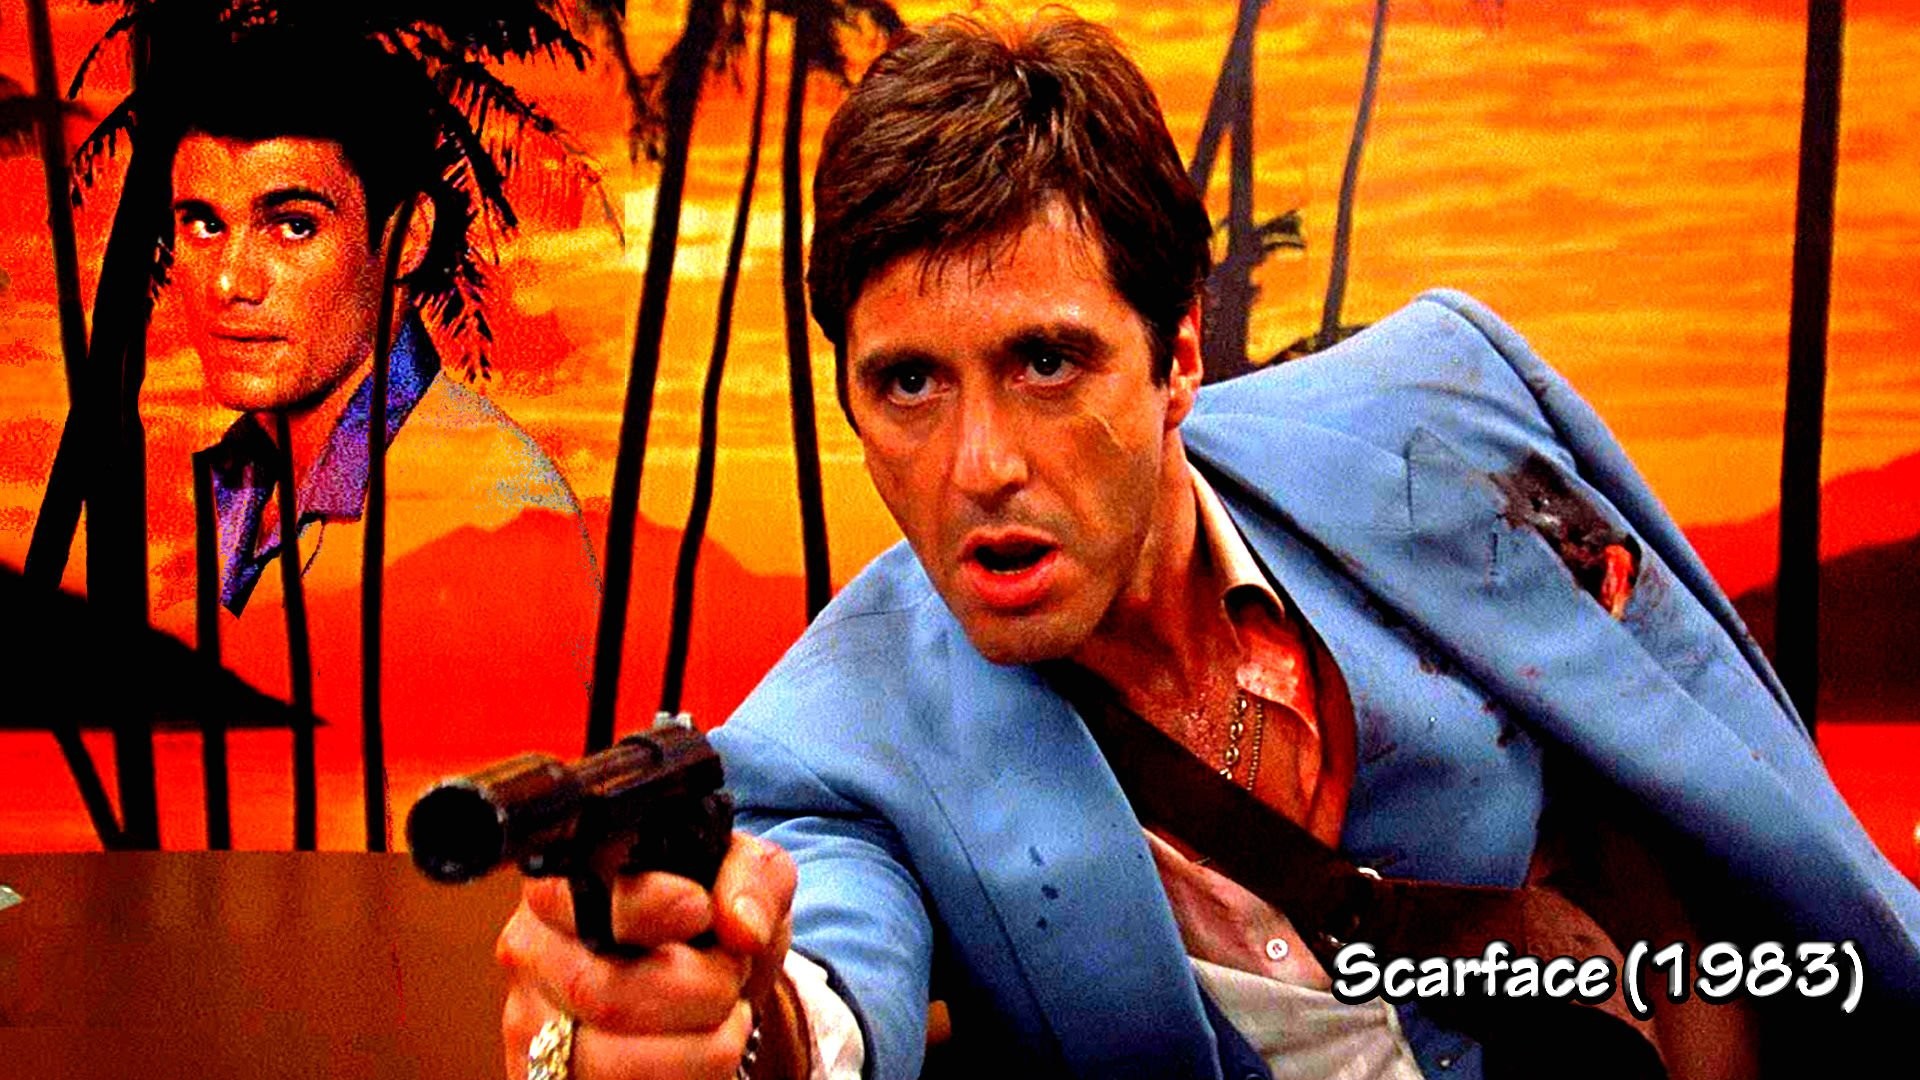 scarface wallpaper,movie,poster,action film,games,hero